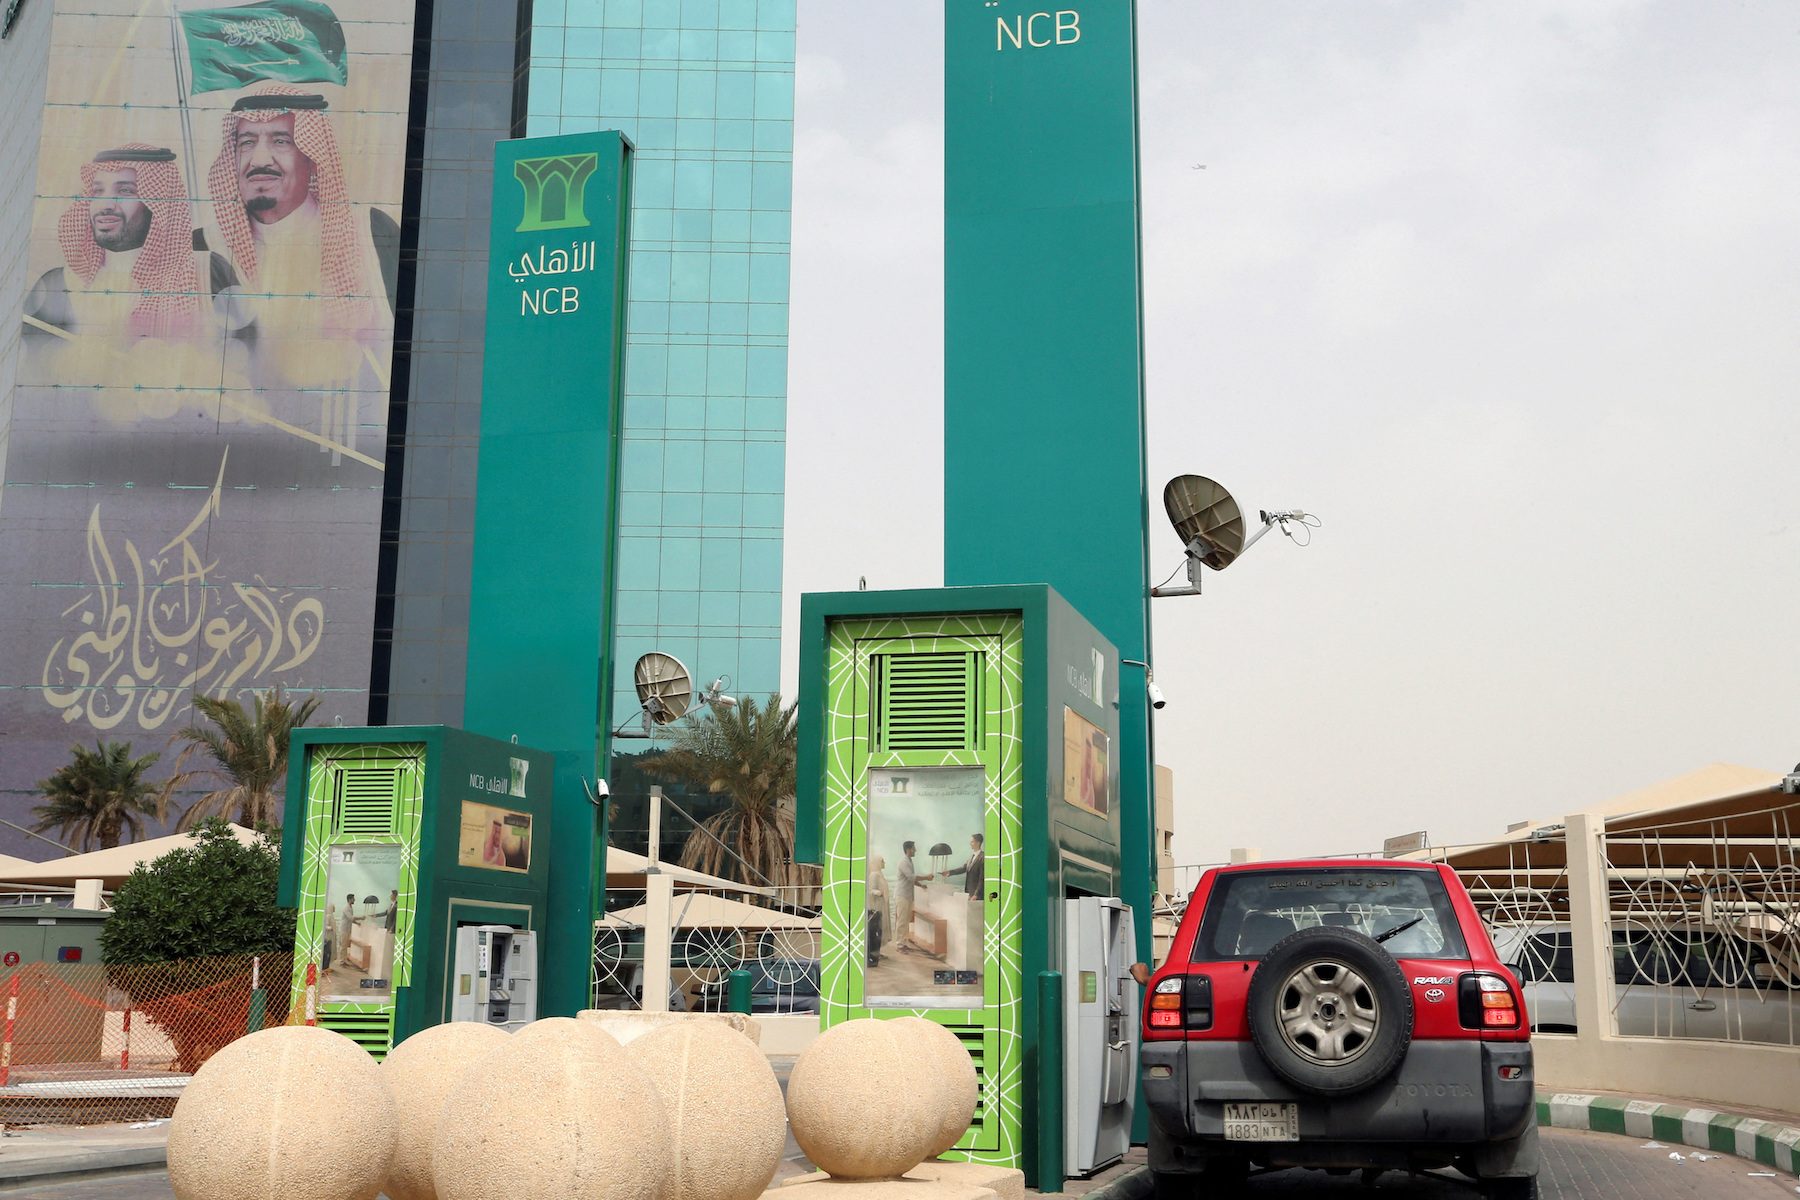 Saudi National Bank strategy unaffected by hit to Credit Suisse investment